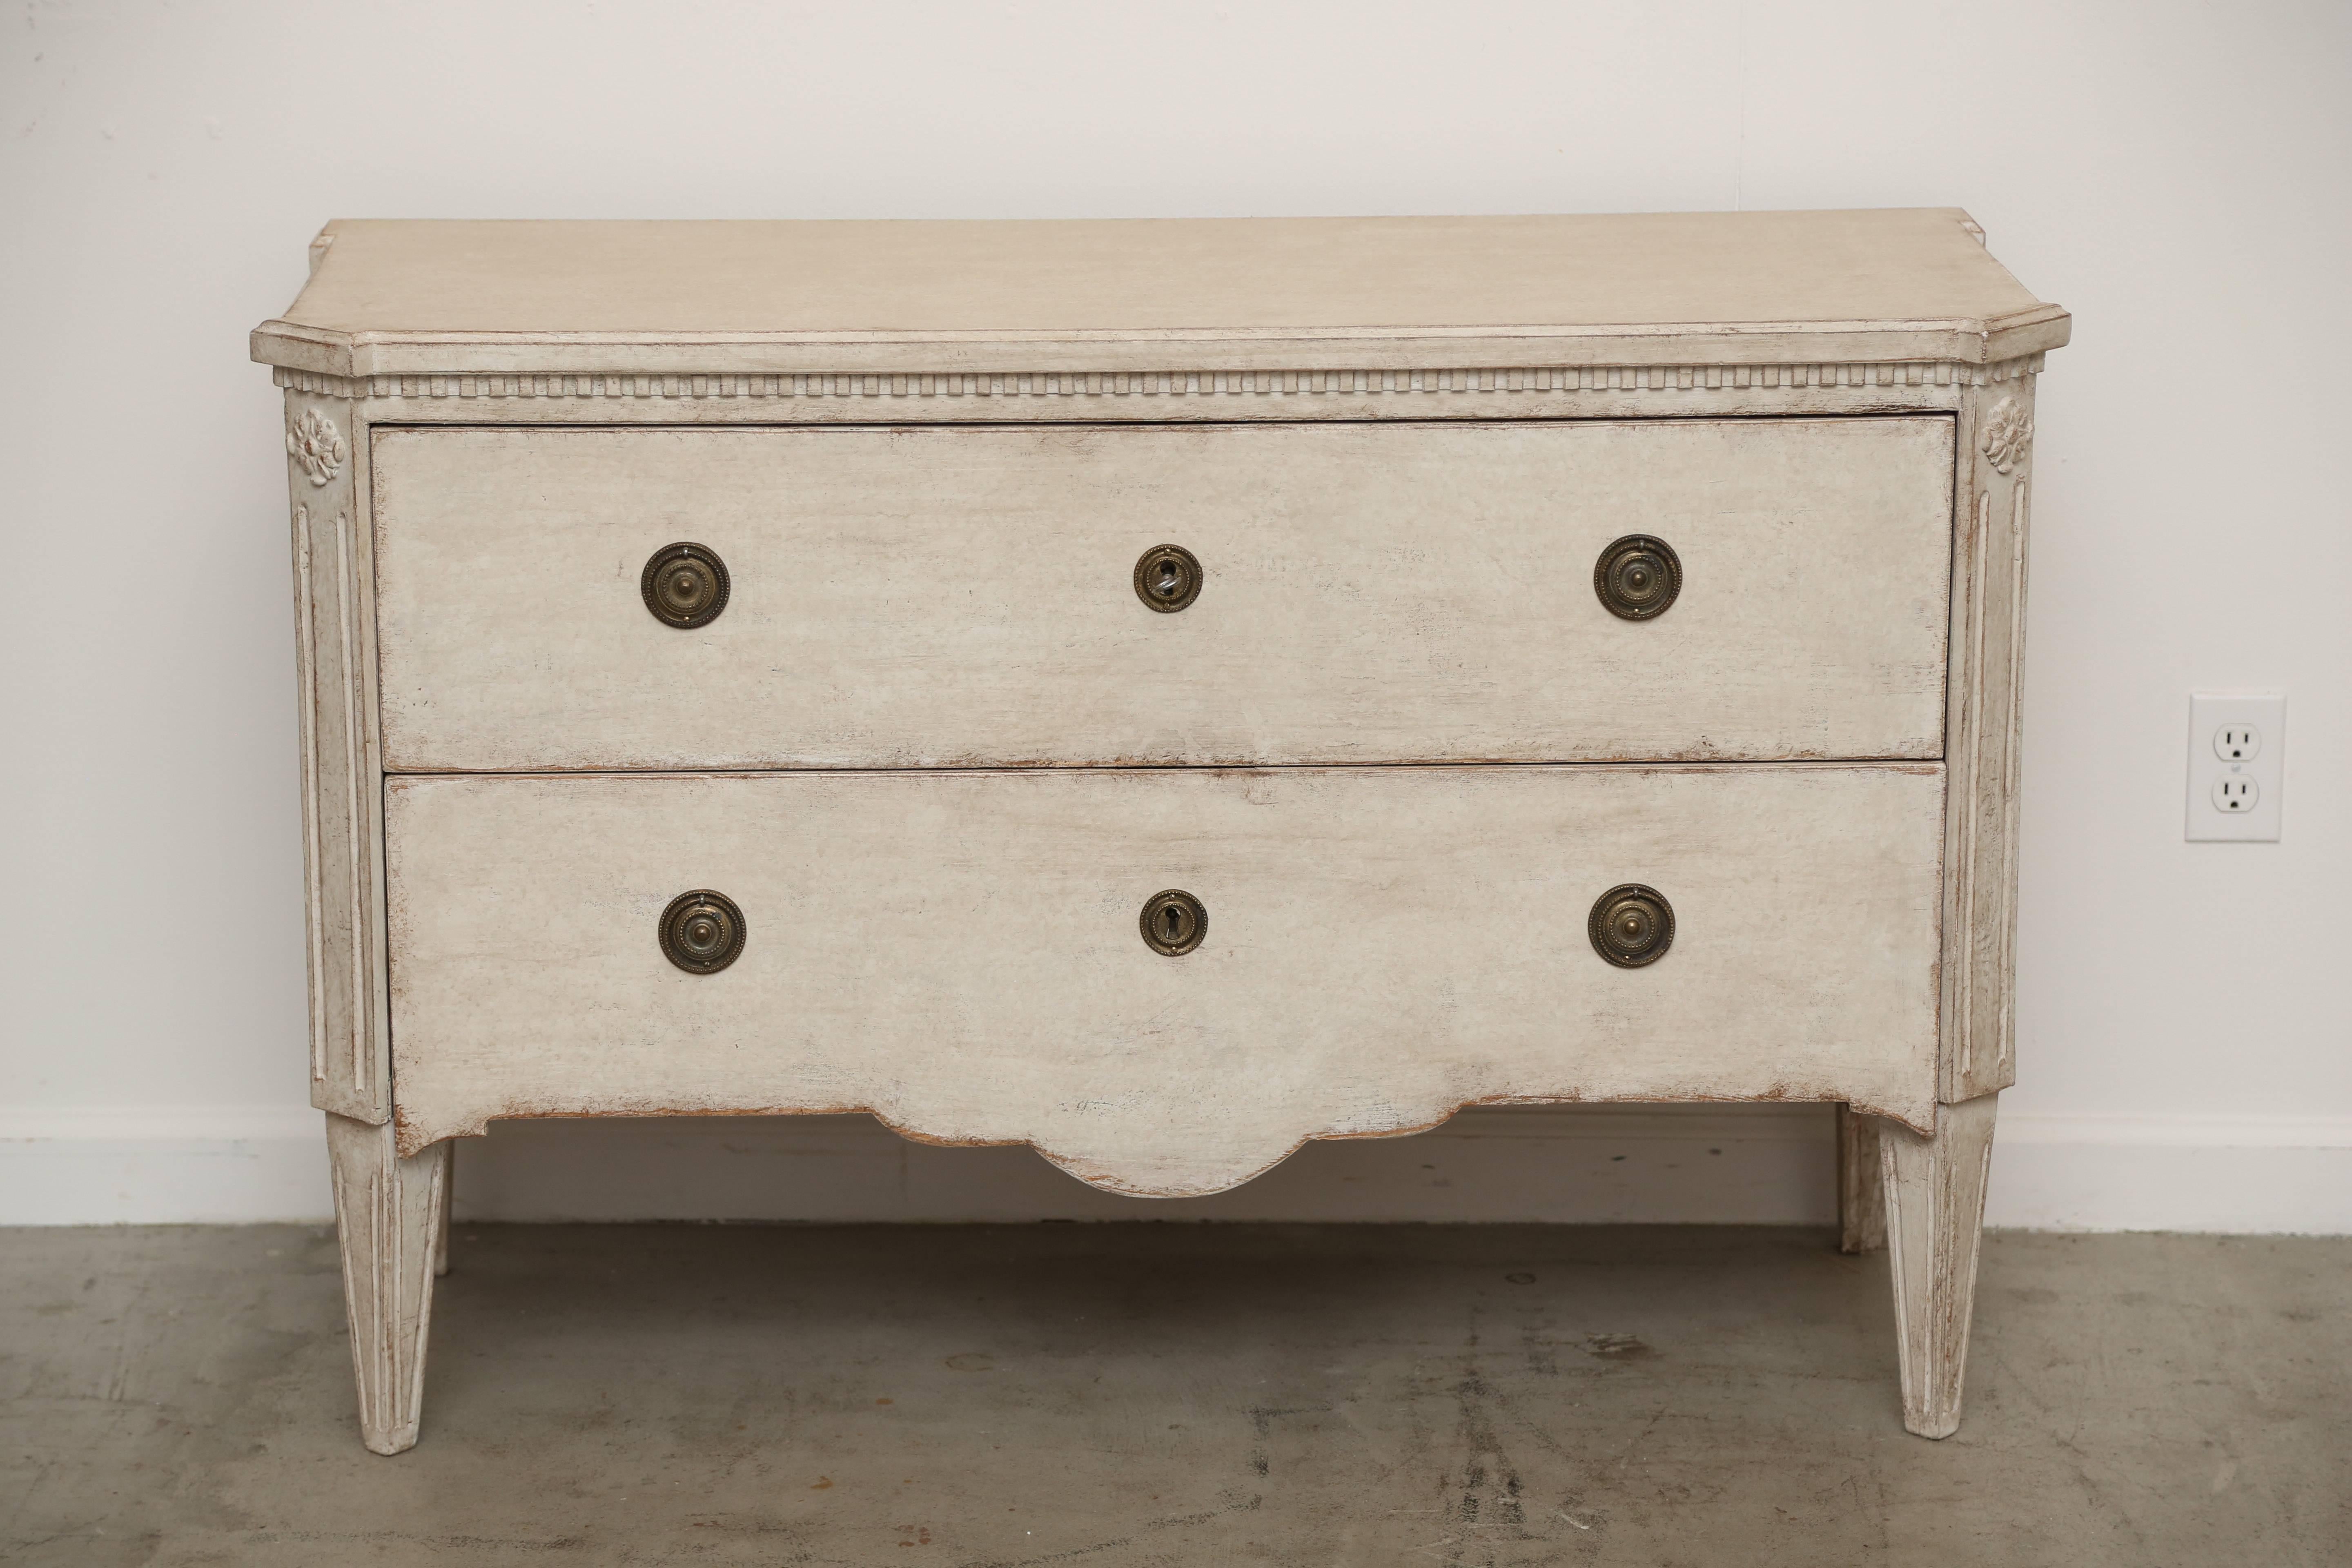 Antique Swedish Gustavian white distressed painted two-drawer chest.
The top is shaped at the corners with a small convex edge, below the top is a
small dental molding border. There are cut corners with a craved rosette and 
fluted panel, classic